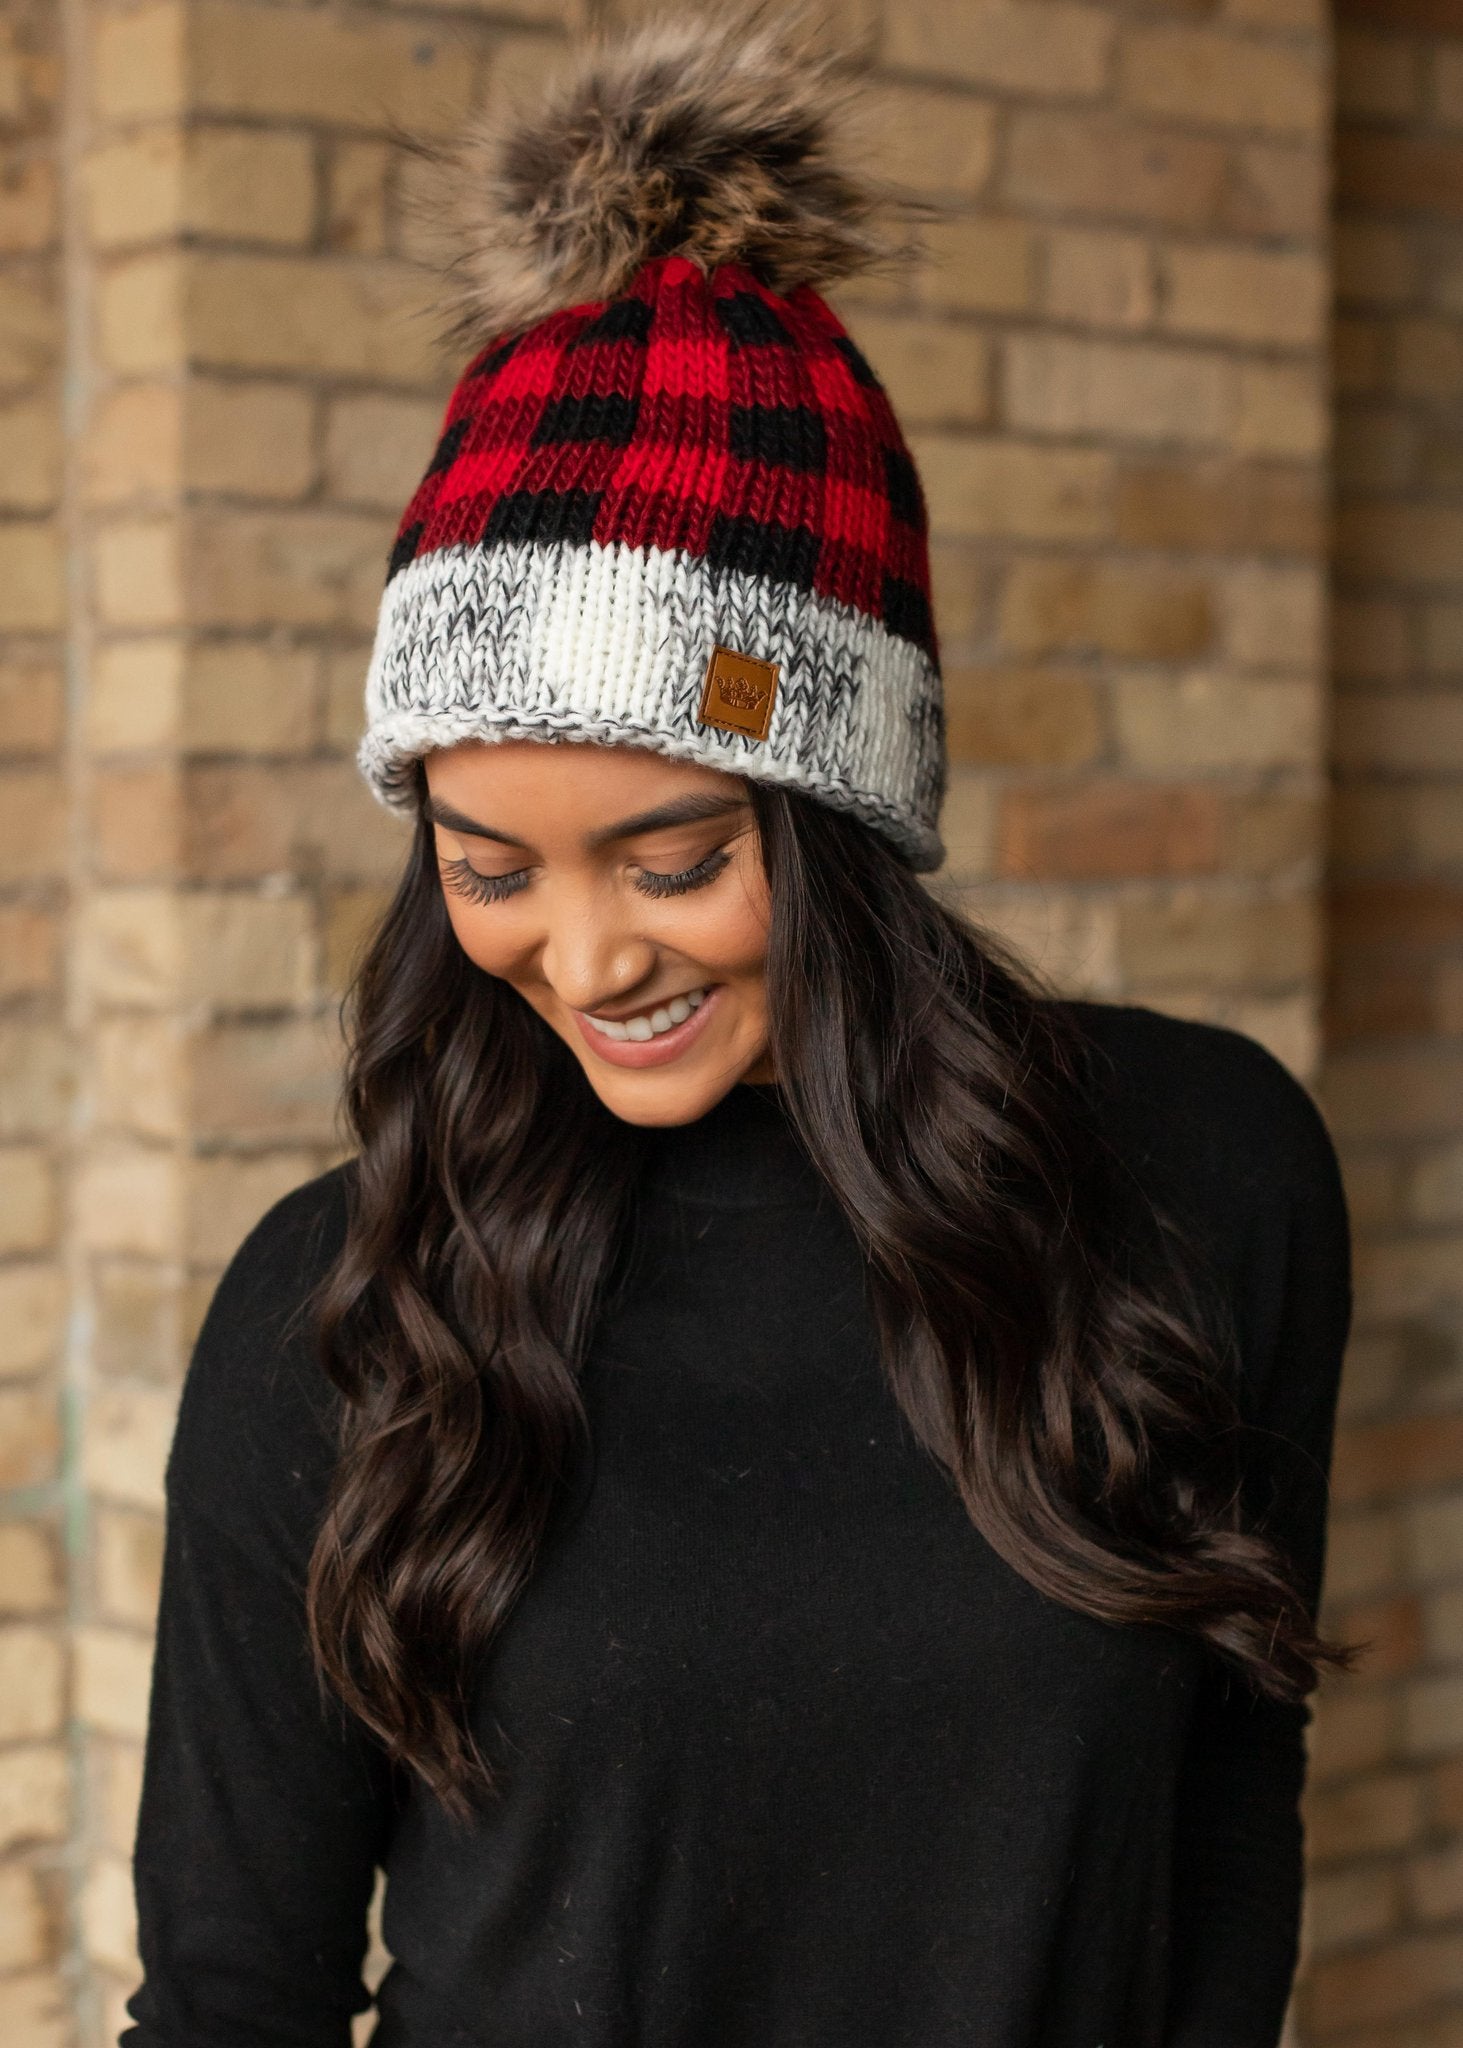 Red Plaid Grey heather with red buffalo plaid trim fleece lined knit hat with pom detail. Popular red plaid accent hat, fleece lined with pom